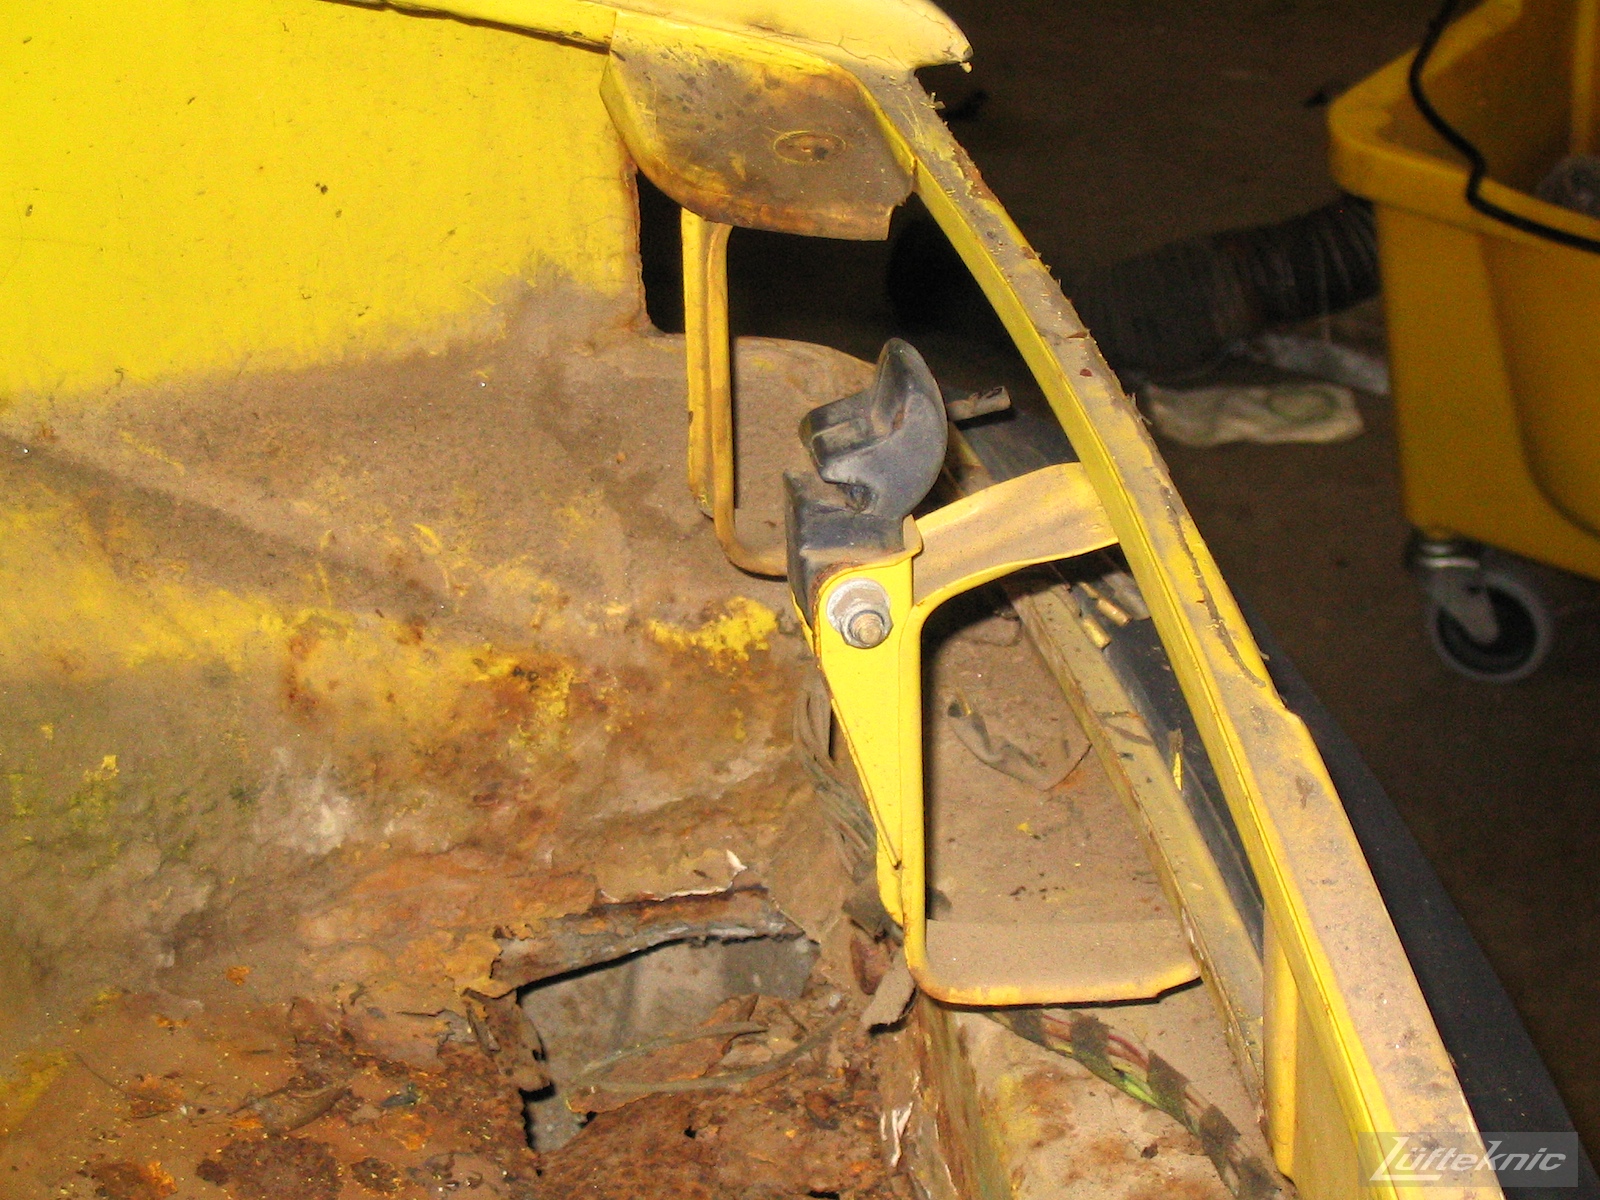 Significant rust damage on the chassis of a yellow Porsche 914.